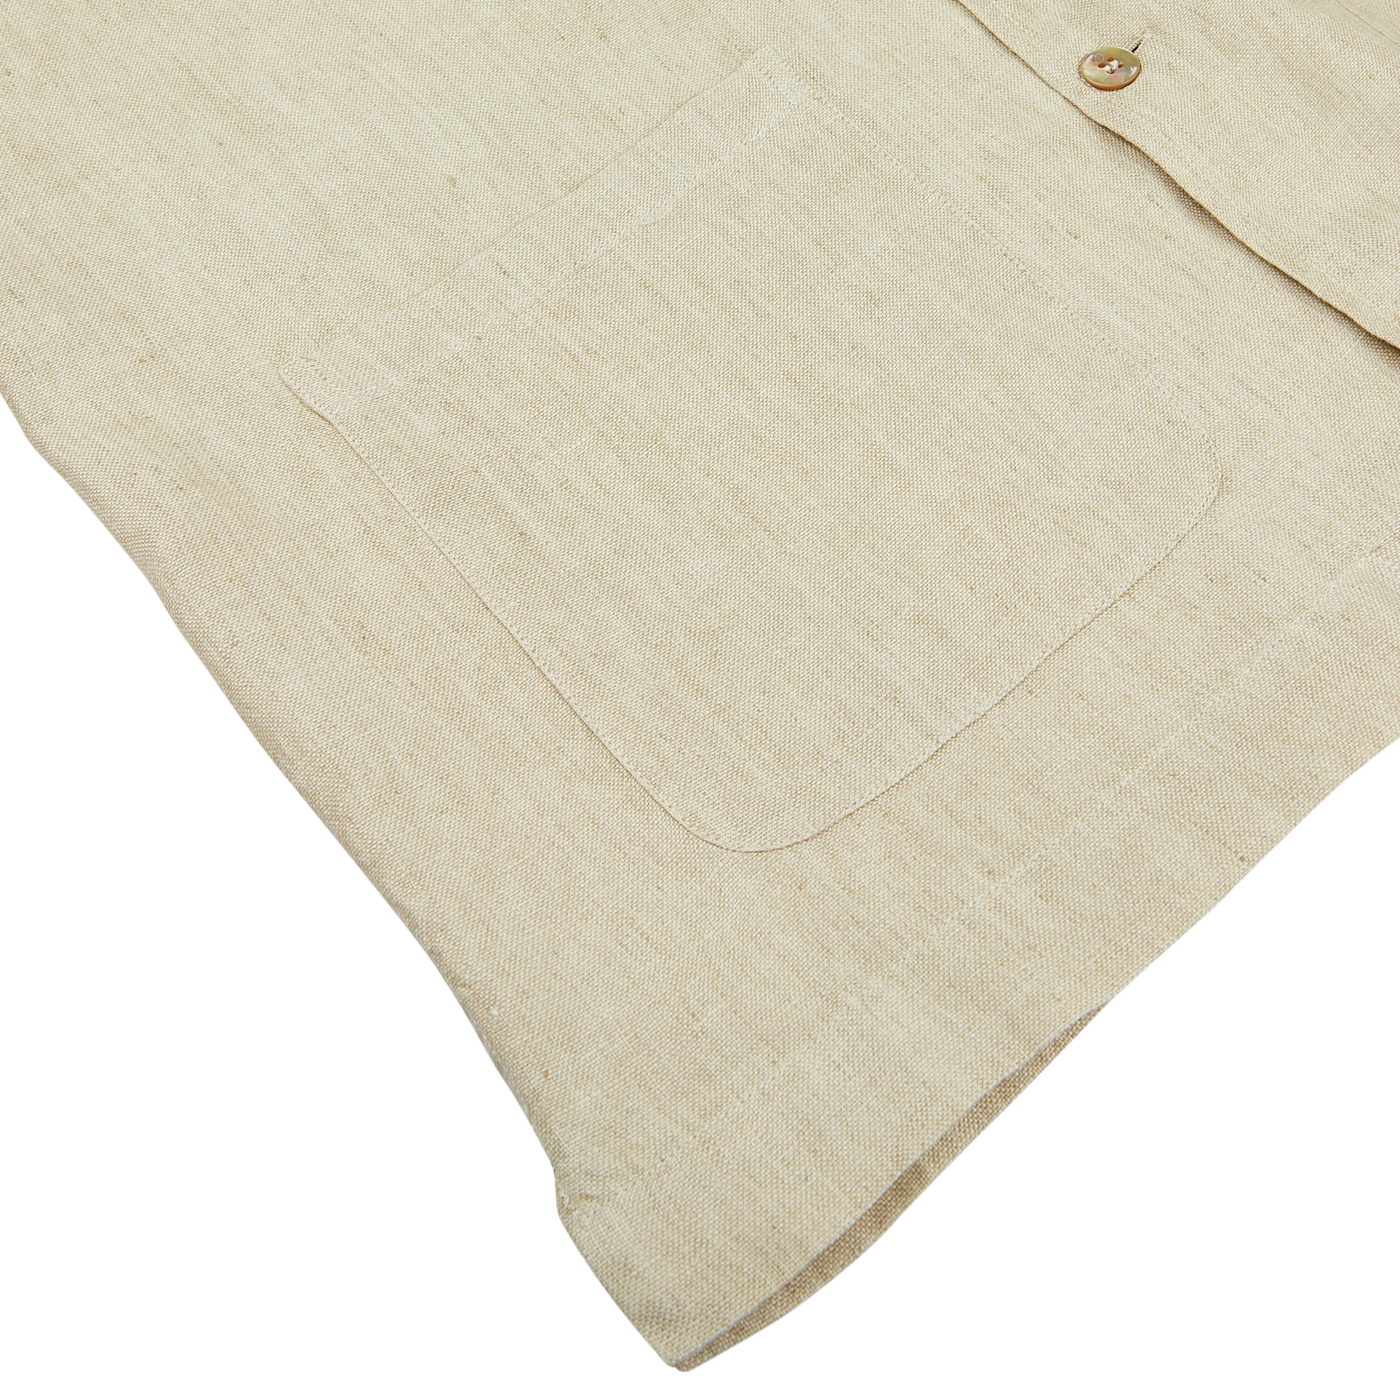 Close-up of a Mazzarelli Khaki Beige Organic Linen Four Pocket Overshirt with a detailed view of the texture, pocket, and a button.